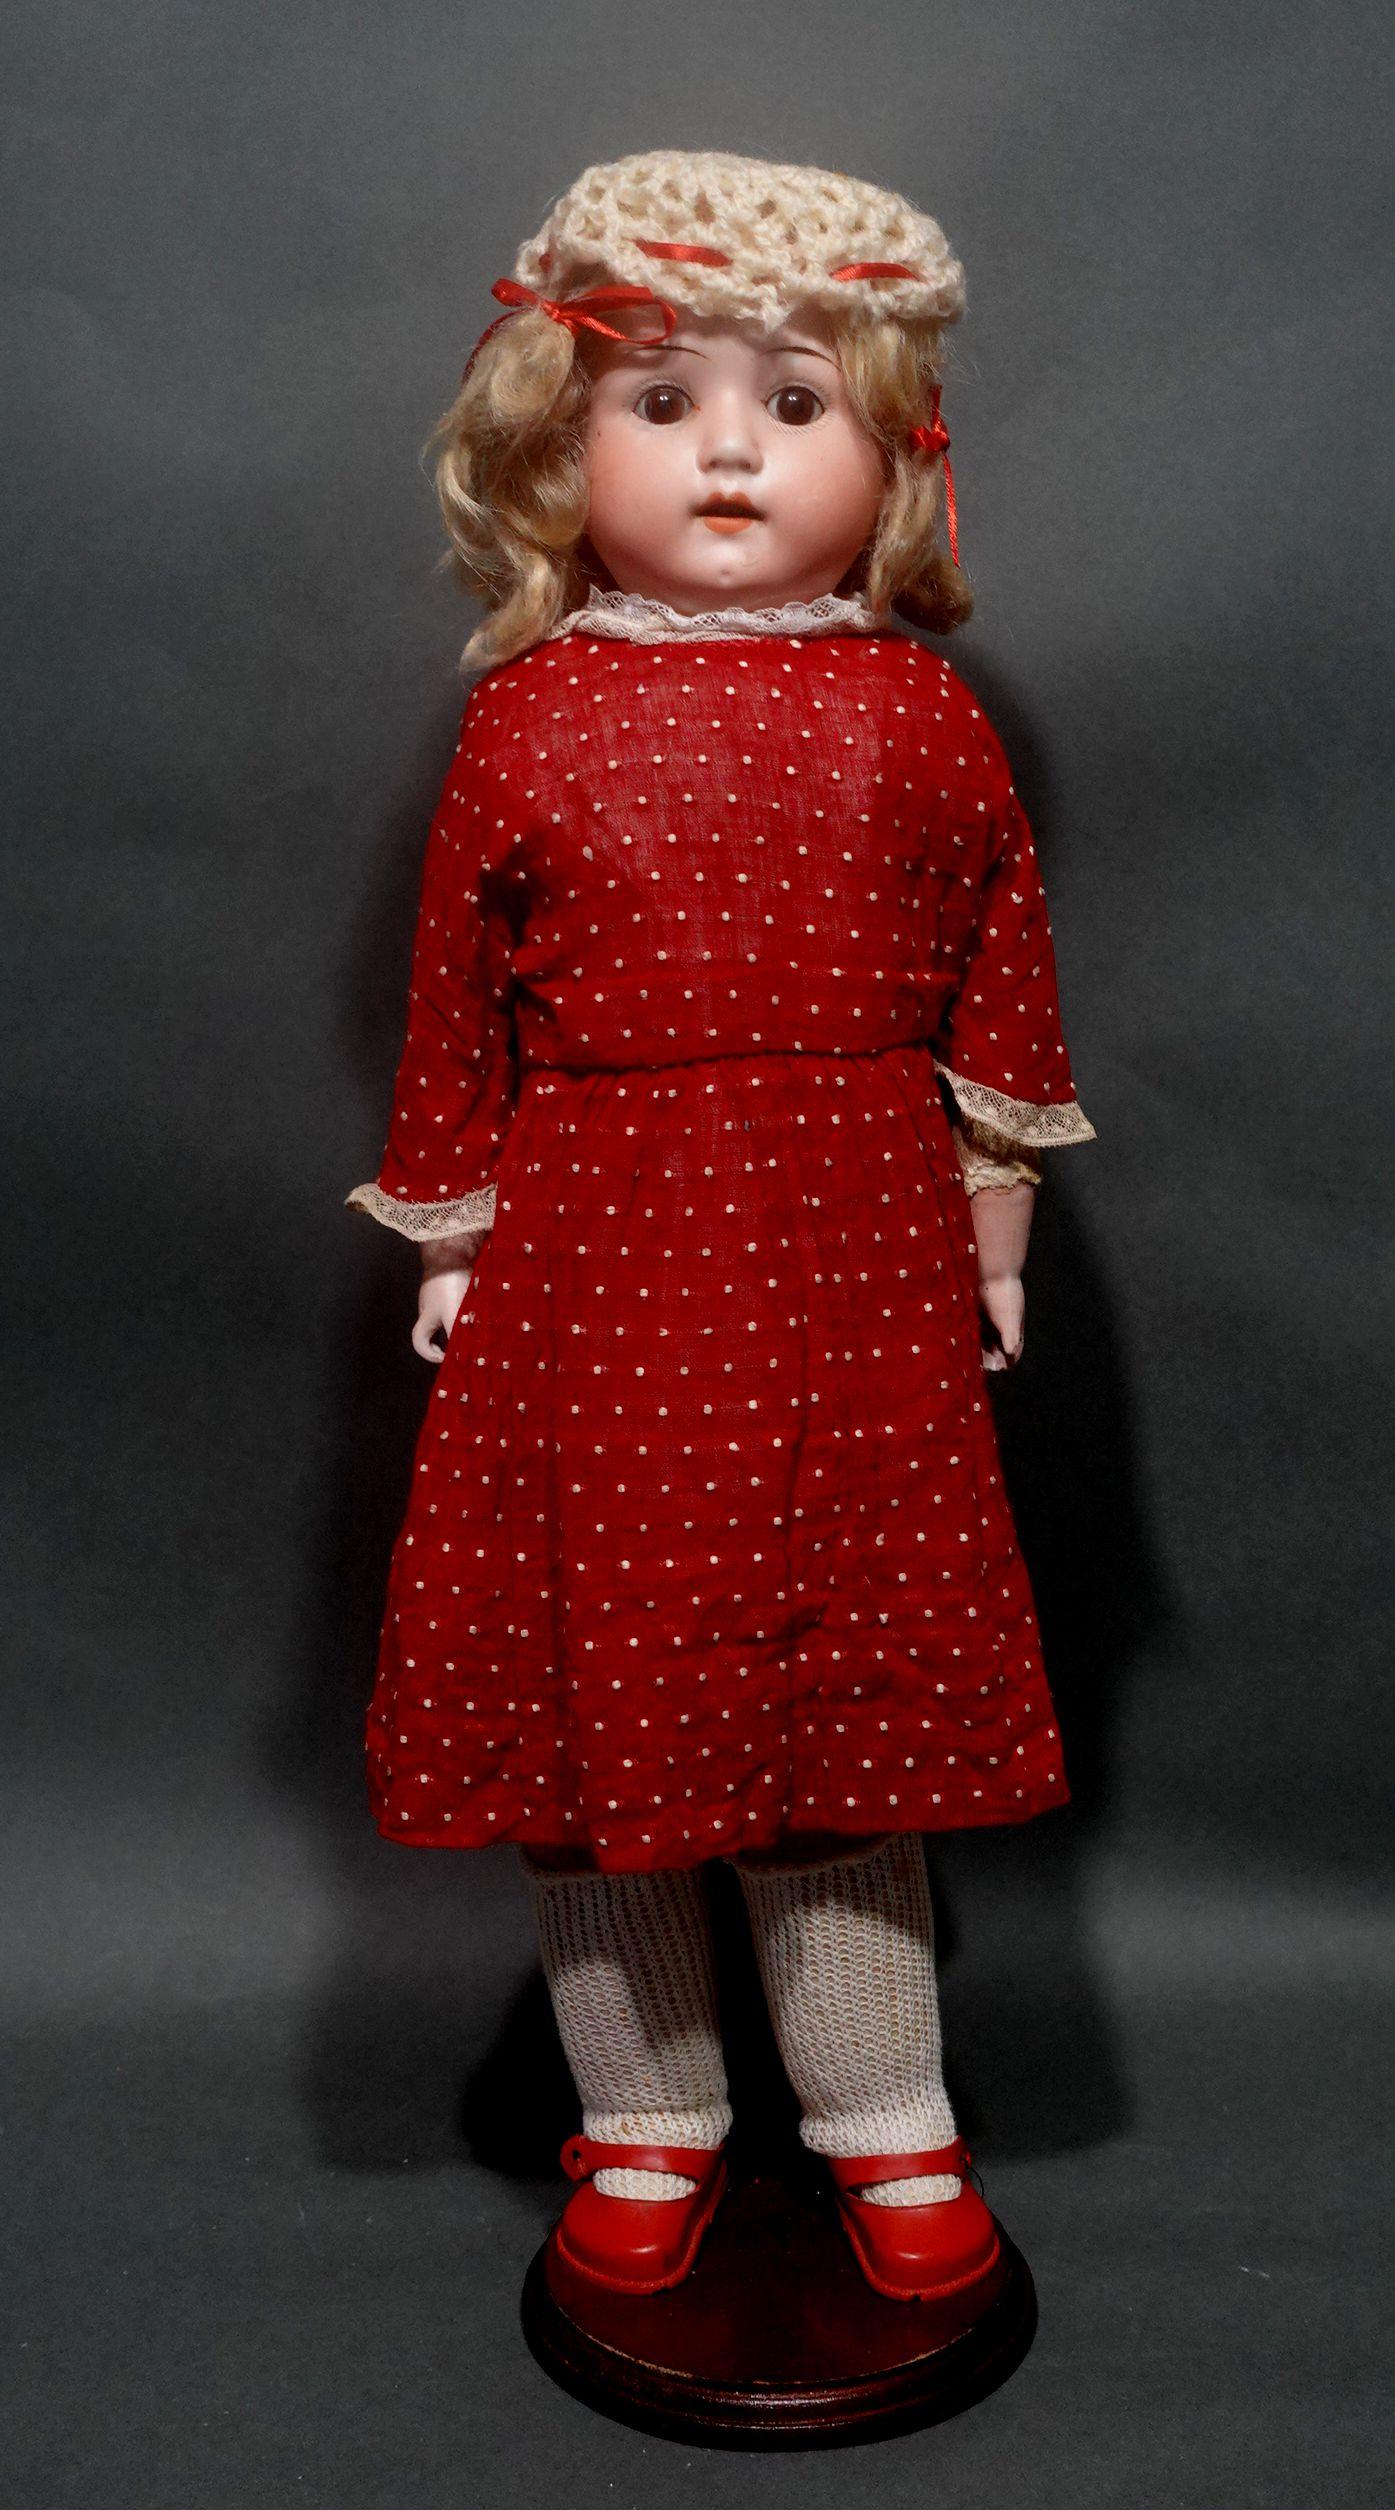 An original Armand Marseille doll, etched into the bisque at her nape with a Bisque head and hands. Her feet wear perfect little red leather shoes with buttons. Beautiful blue glass eyes that seamlessly open and close and her parted lips show her